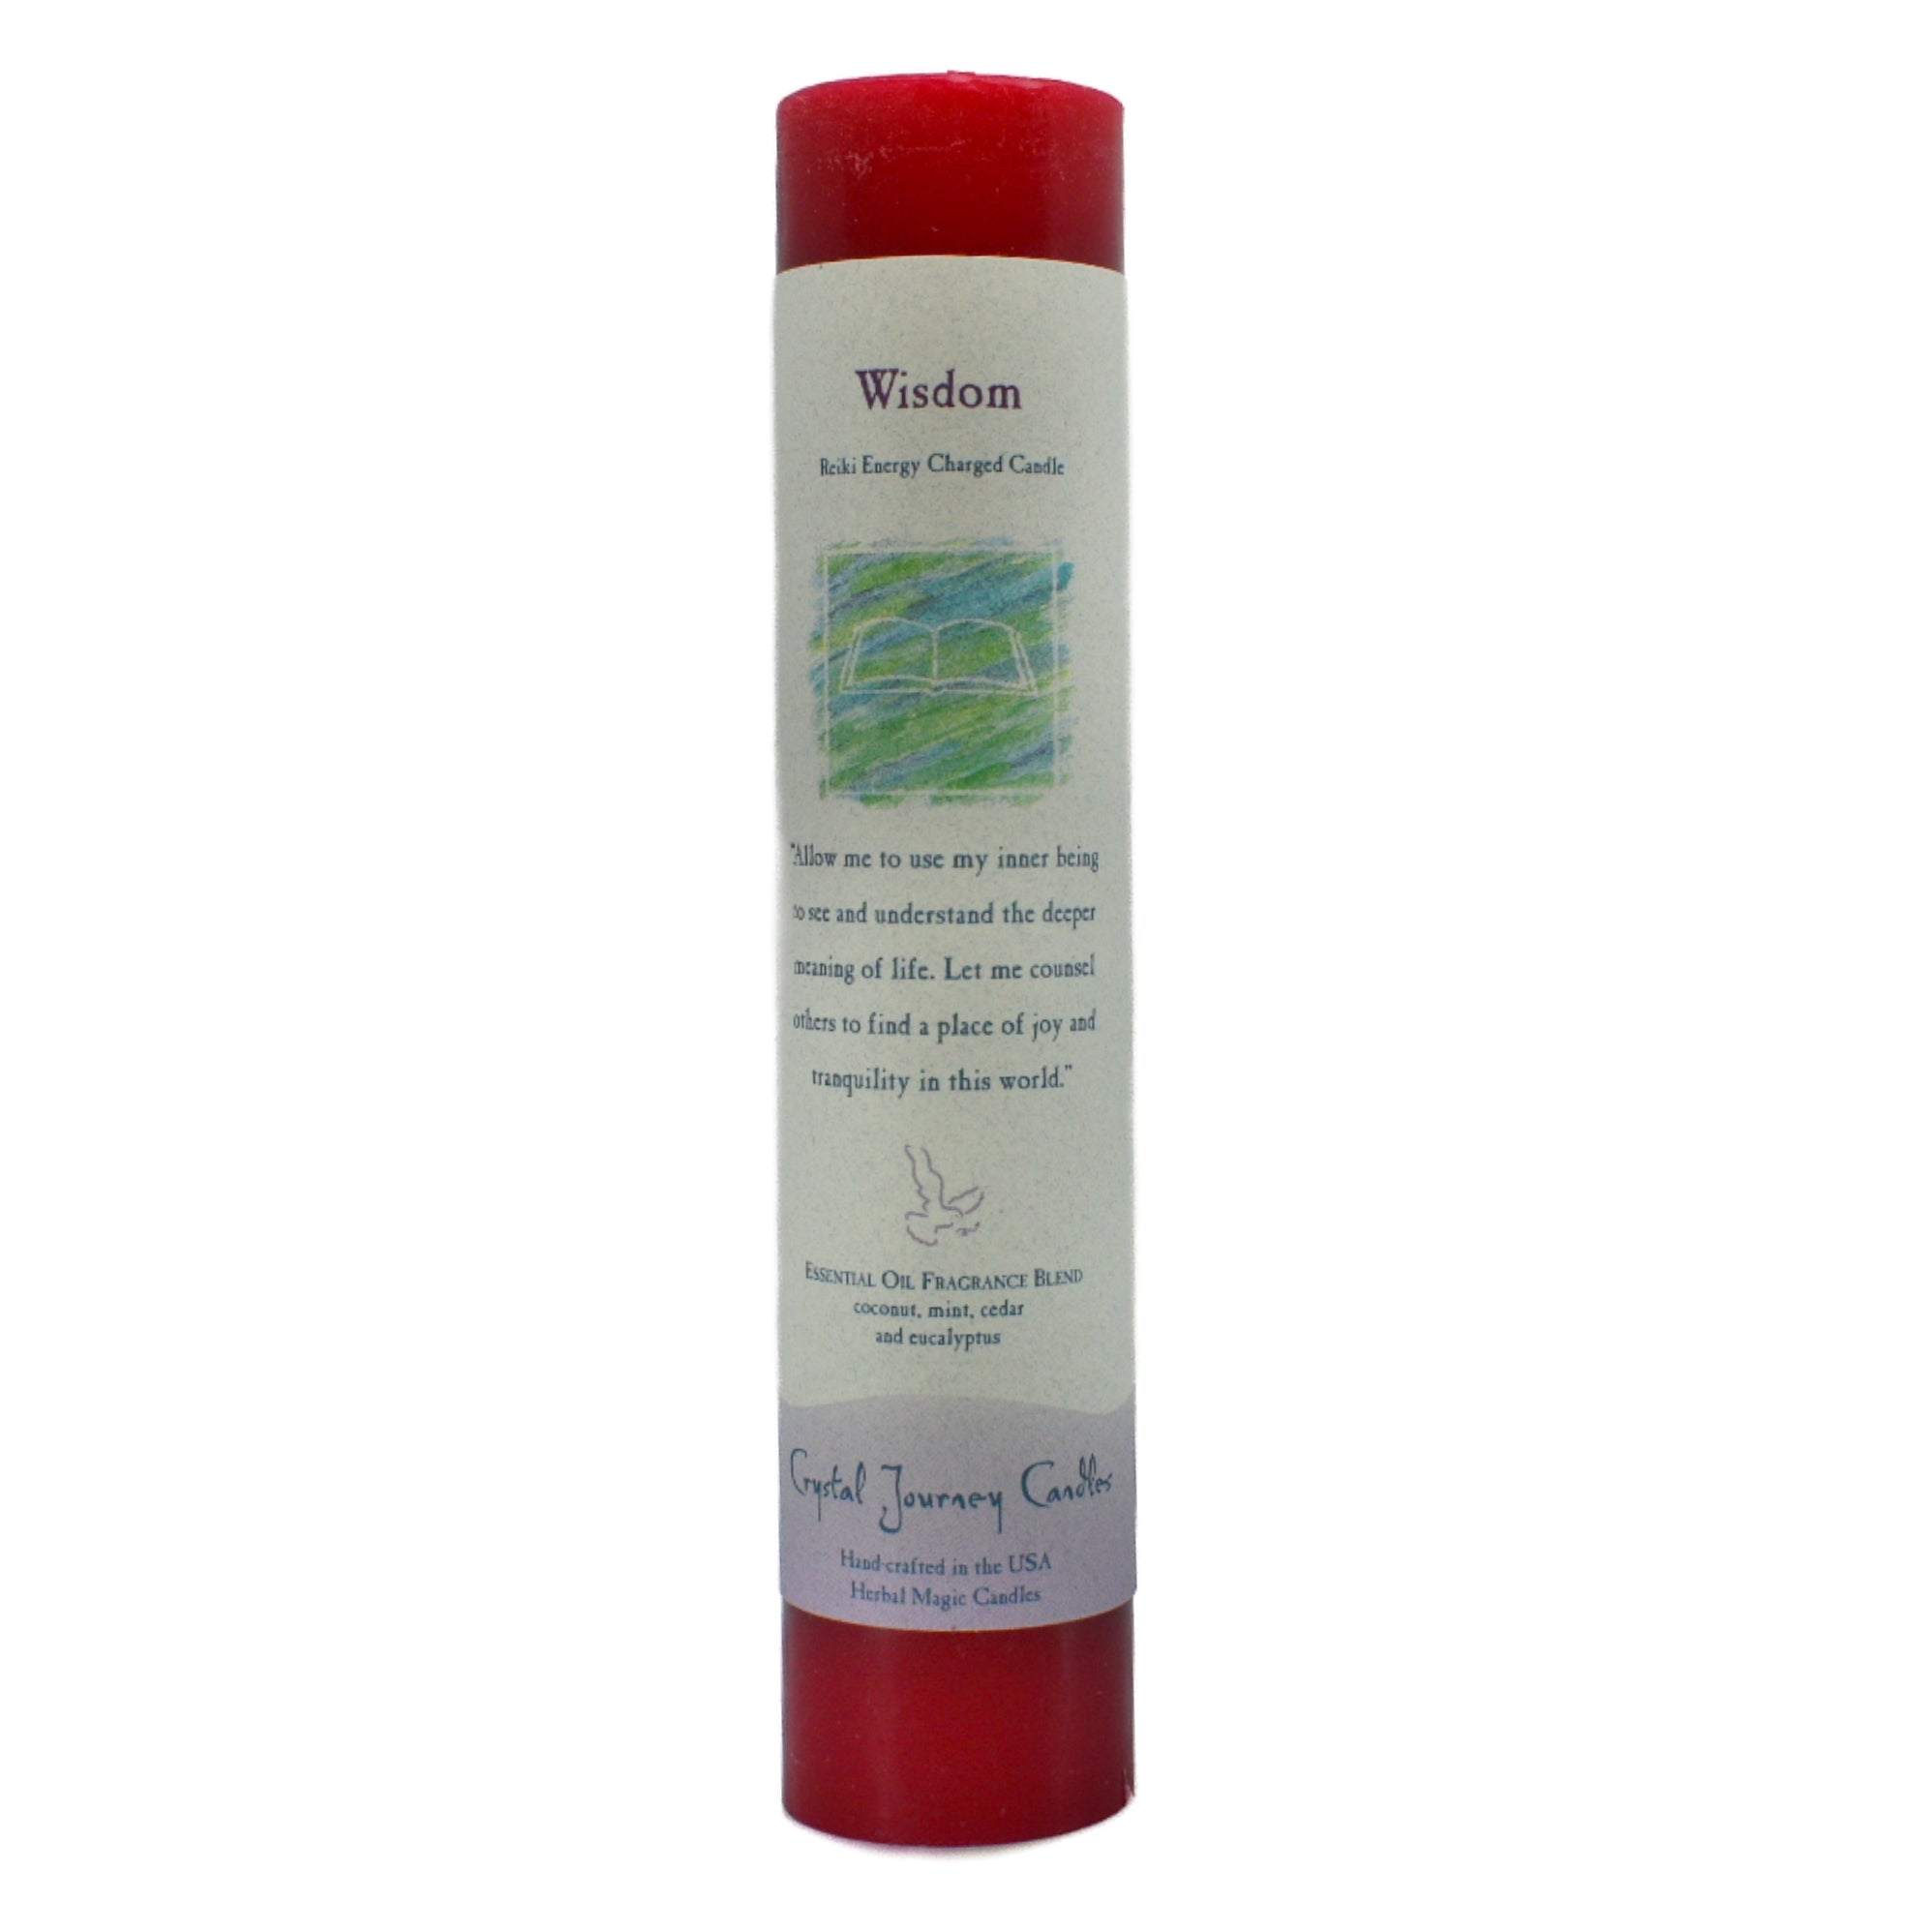 Wisdom Pillar Candle.  Is a red scented candle with coconut, mint, cedar and eucalyptus essential oils.  Burn this candle to assist in the voyage to a deeper understanding in the meaning of life.